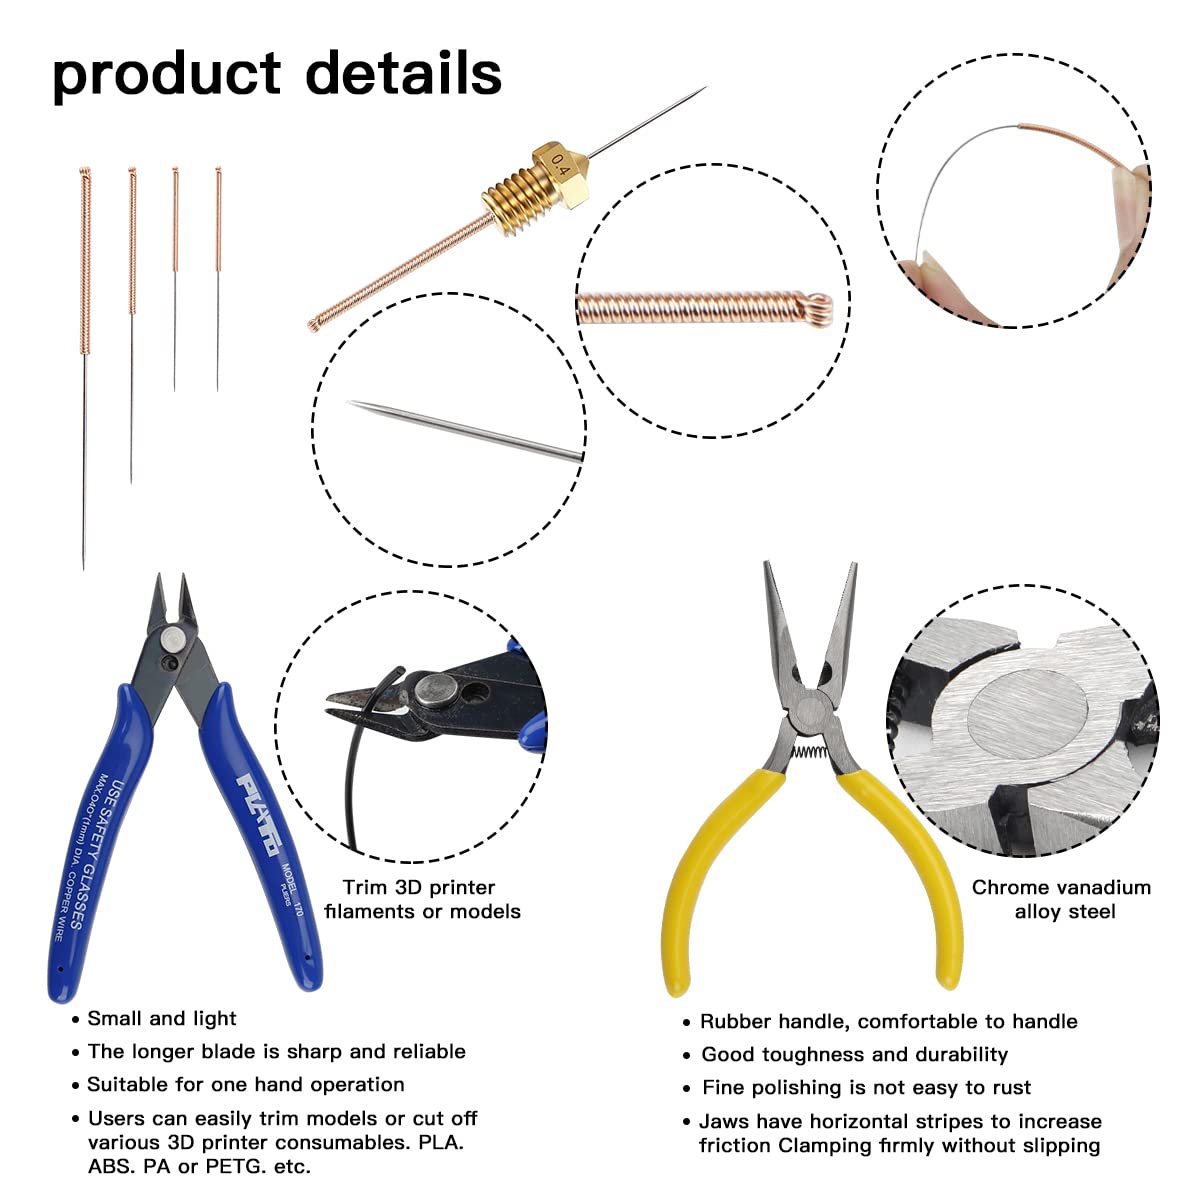 bczamd-39pcs-3d-printer-tools-kit-includes-resin-removal-cleaning-deburring-tool-sanding-and-hotend-disassembly-multi-pu-2 BCZAMD 39Pcs 3D Printer Tools Kit Review